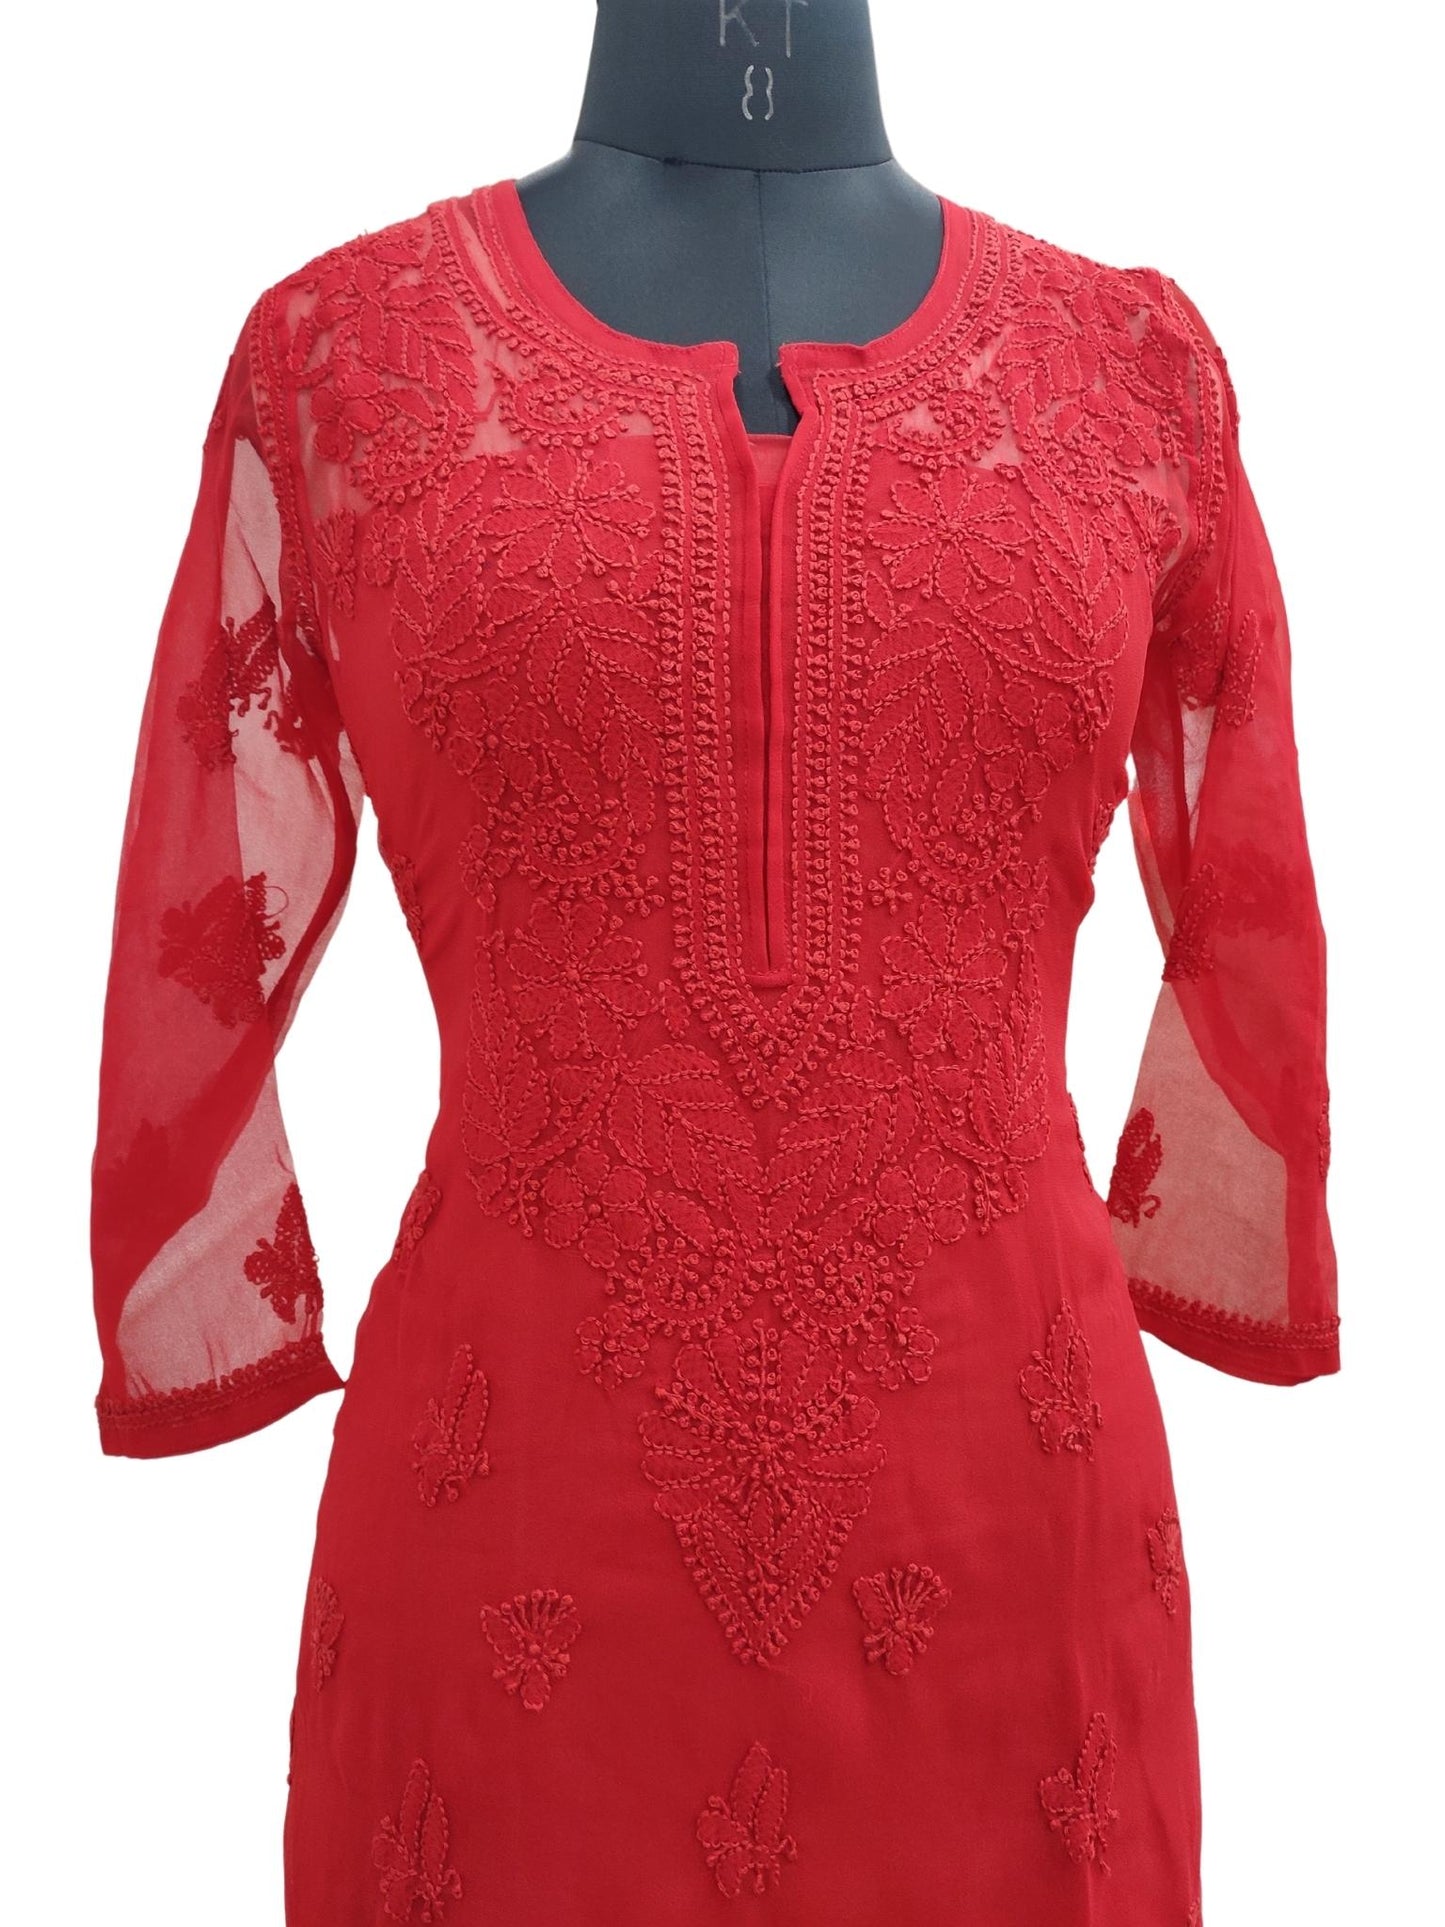 Buy Asian Suits Red Georgette Embroidered Front Slit Kurti LKV001634